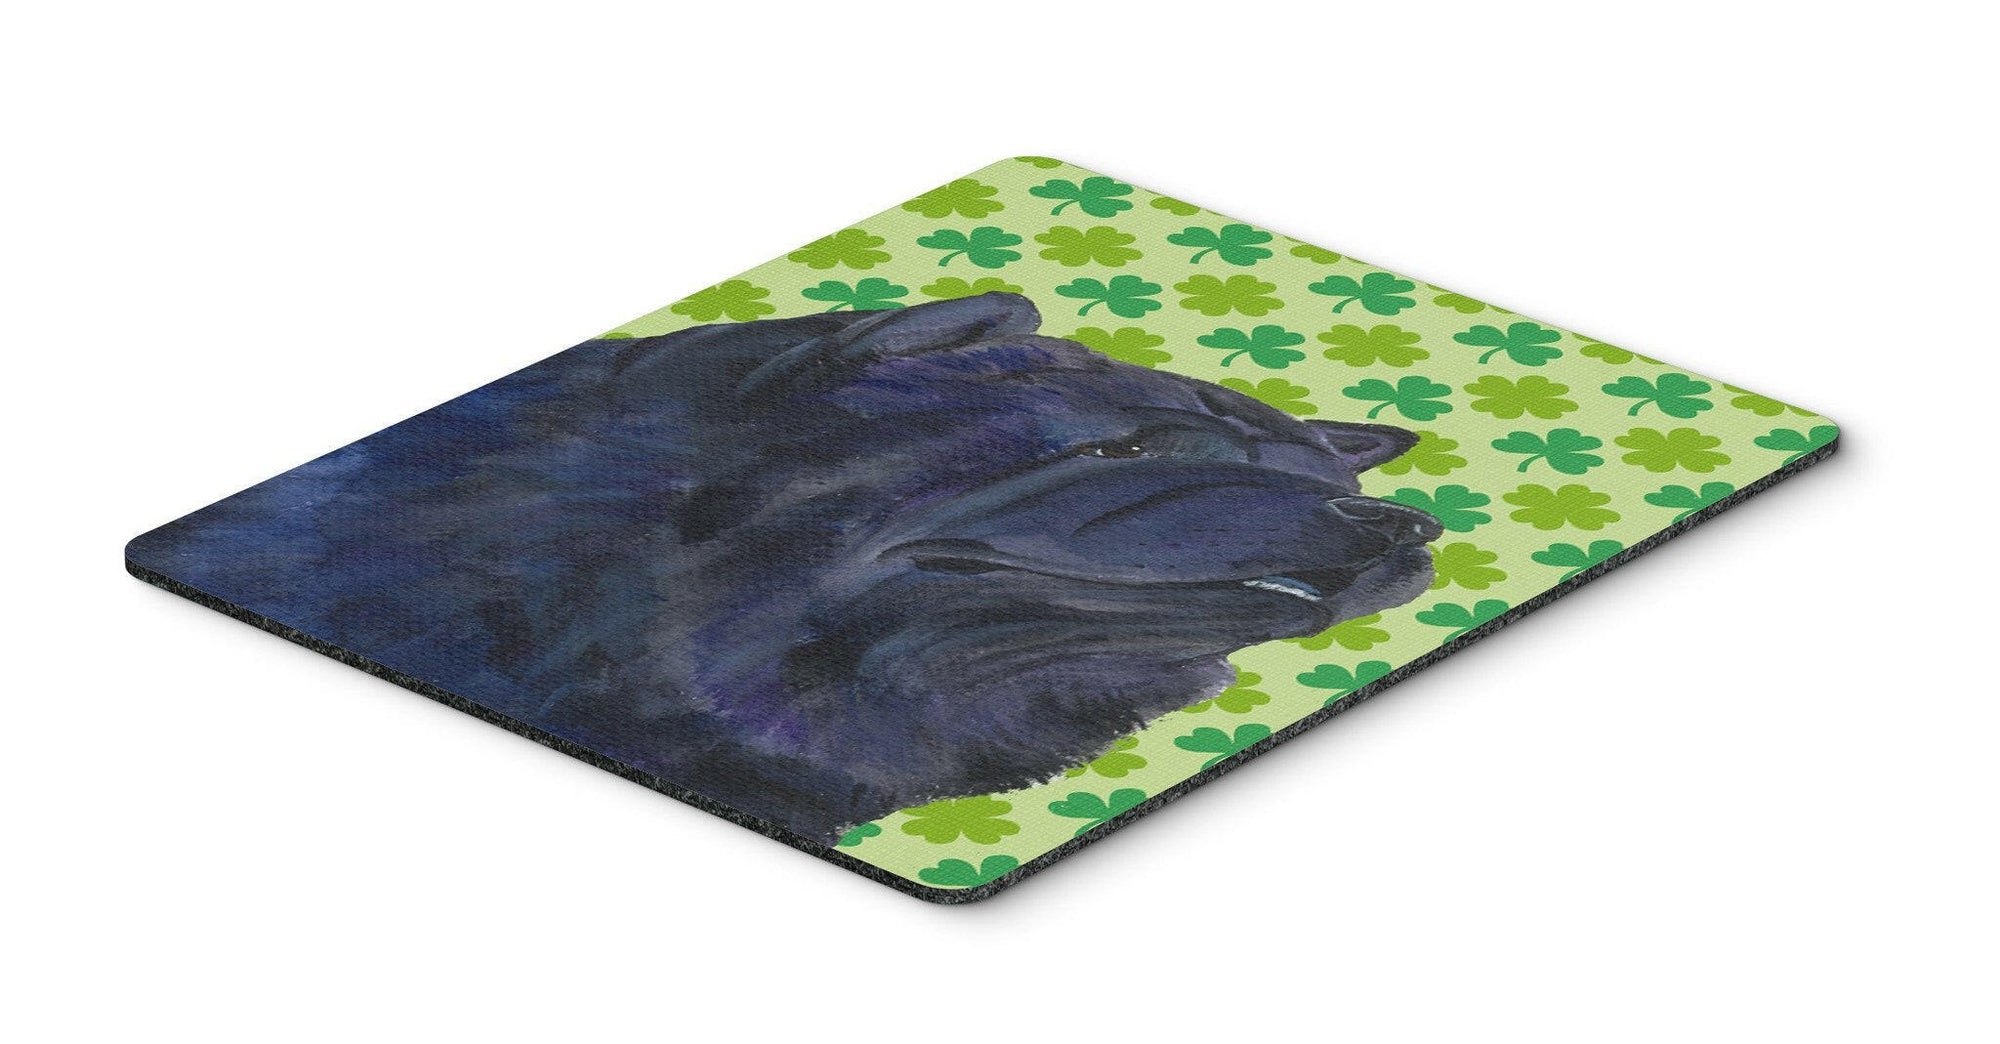 Chow Chow St. Patrick's Day Shamrock Portrait Mouse Pad, Hot Pad or Trivet by Caroline's Treasures